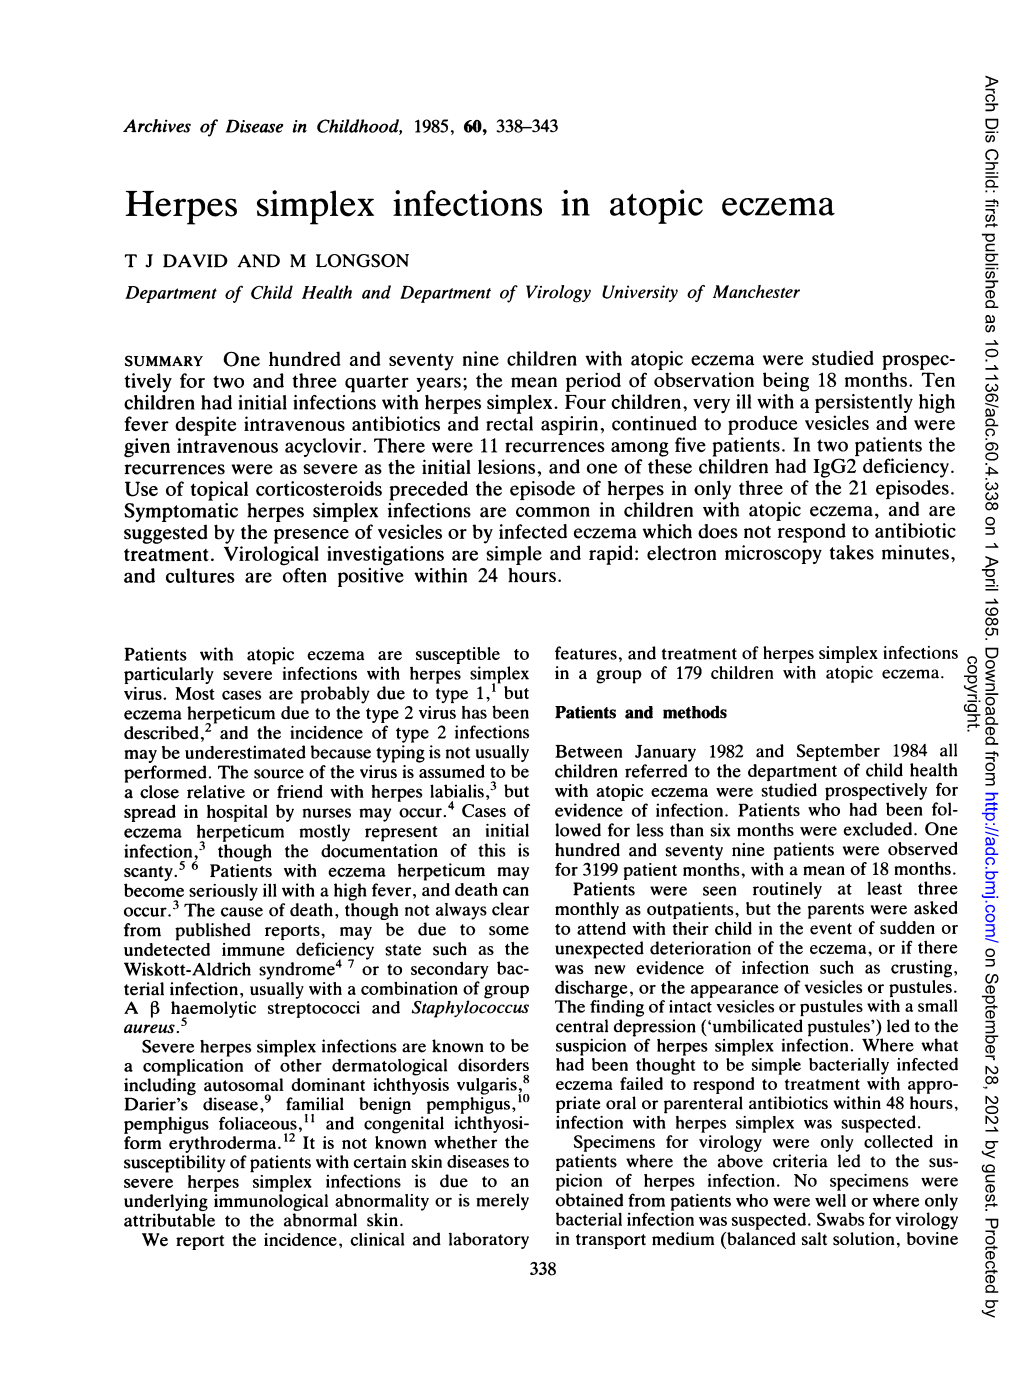 Herpes Simplex Infections in Atopic Eczema